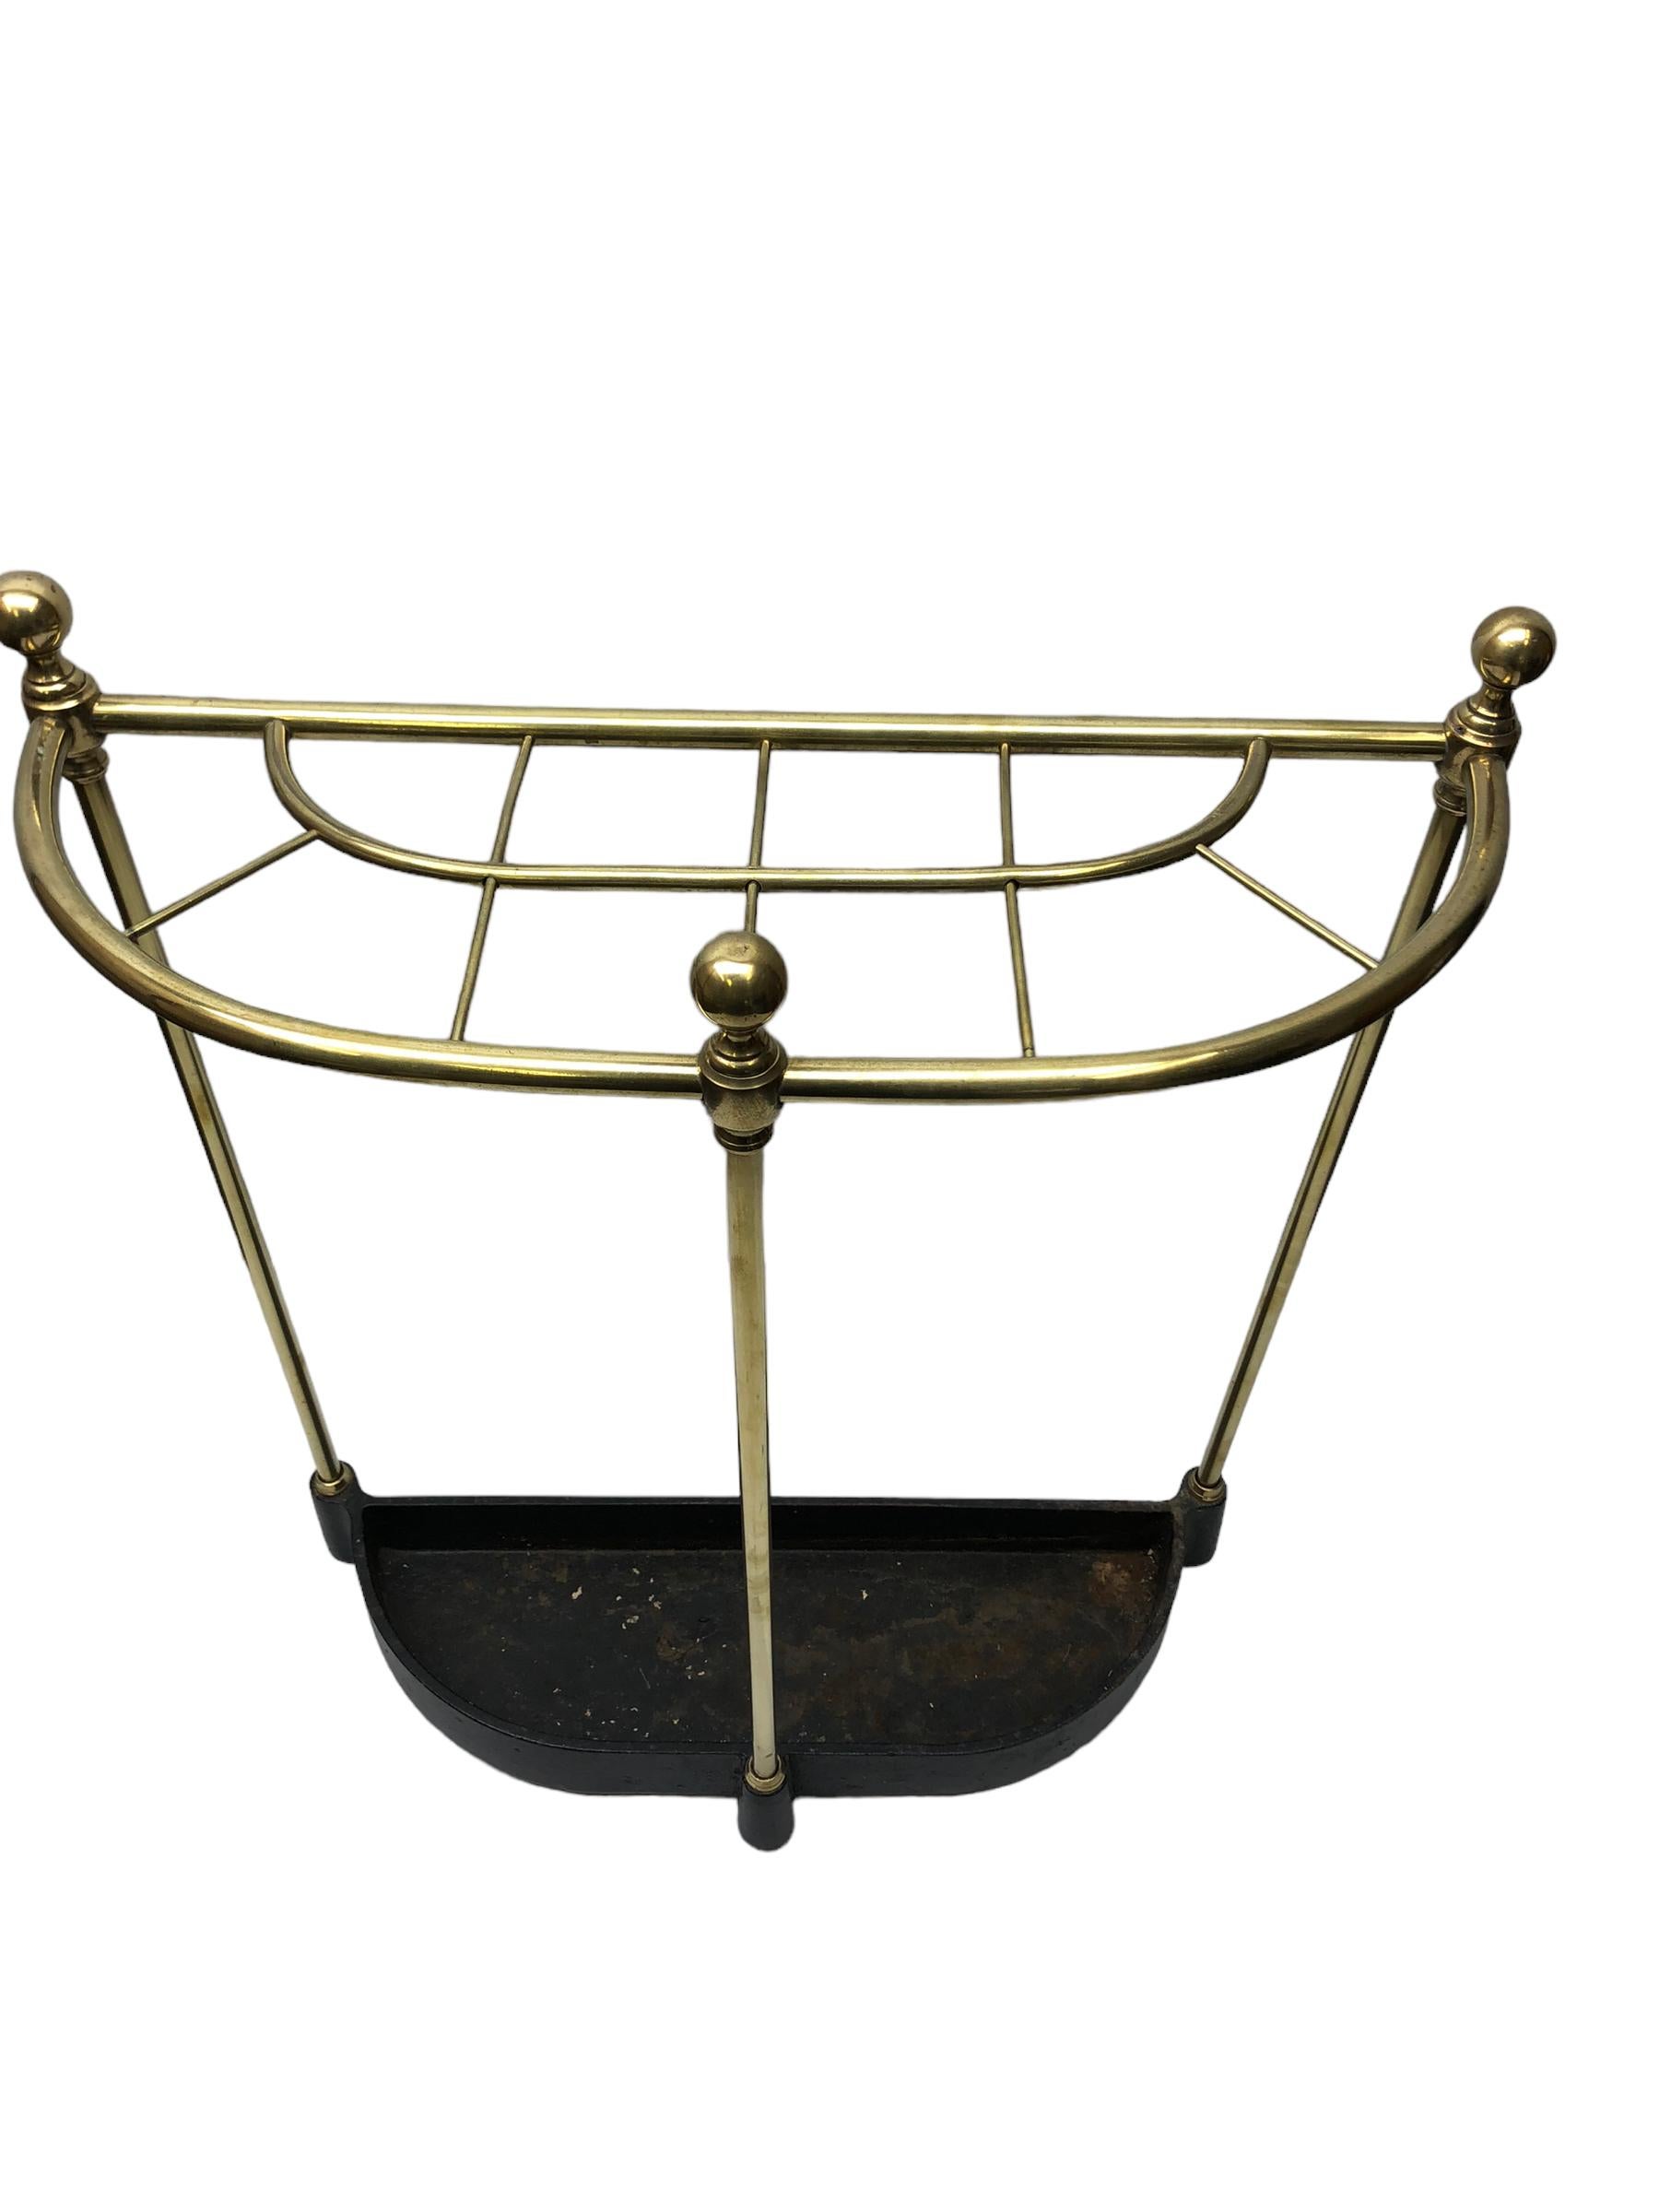 Vintage English Half Round Brass Umbrella Stand With Cast Iron Base  In Good Condition For Sale In Chapel Hill, NC